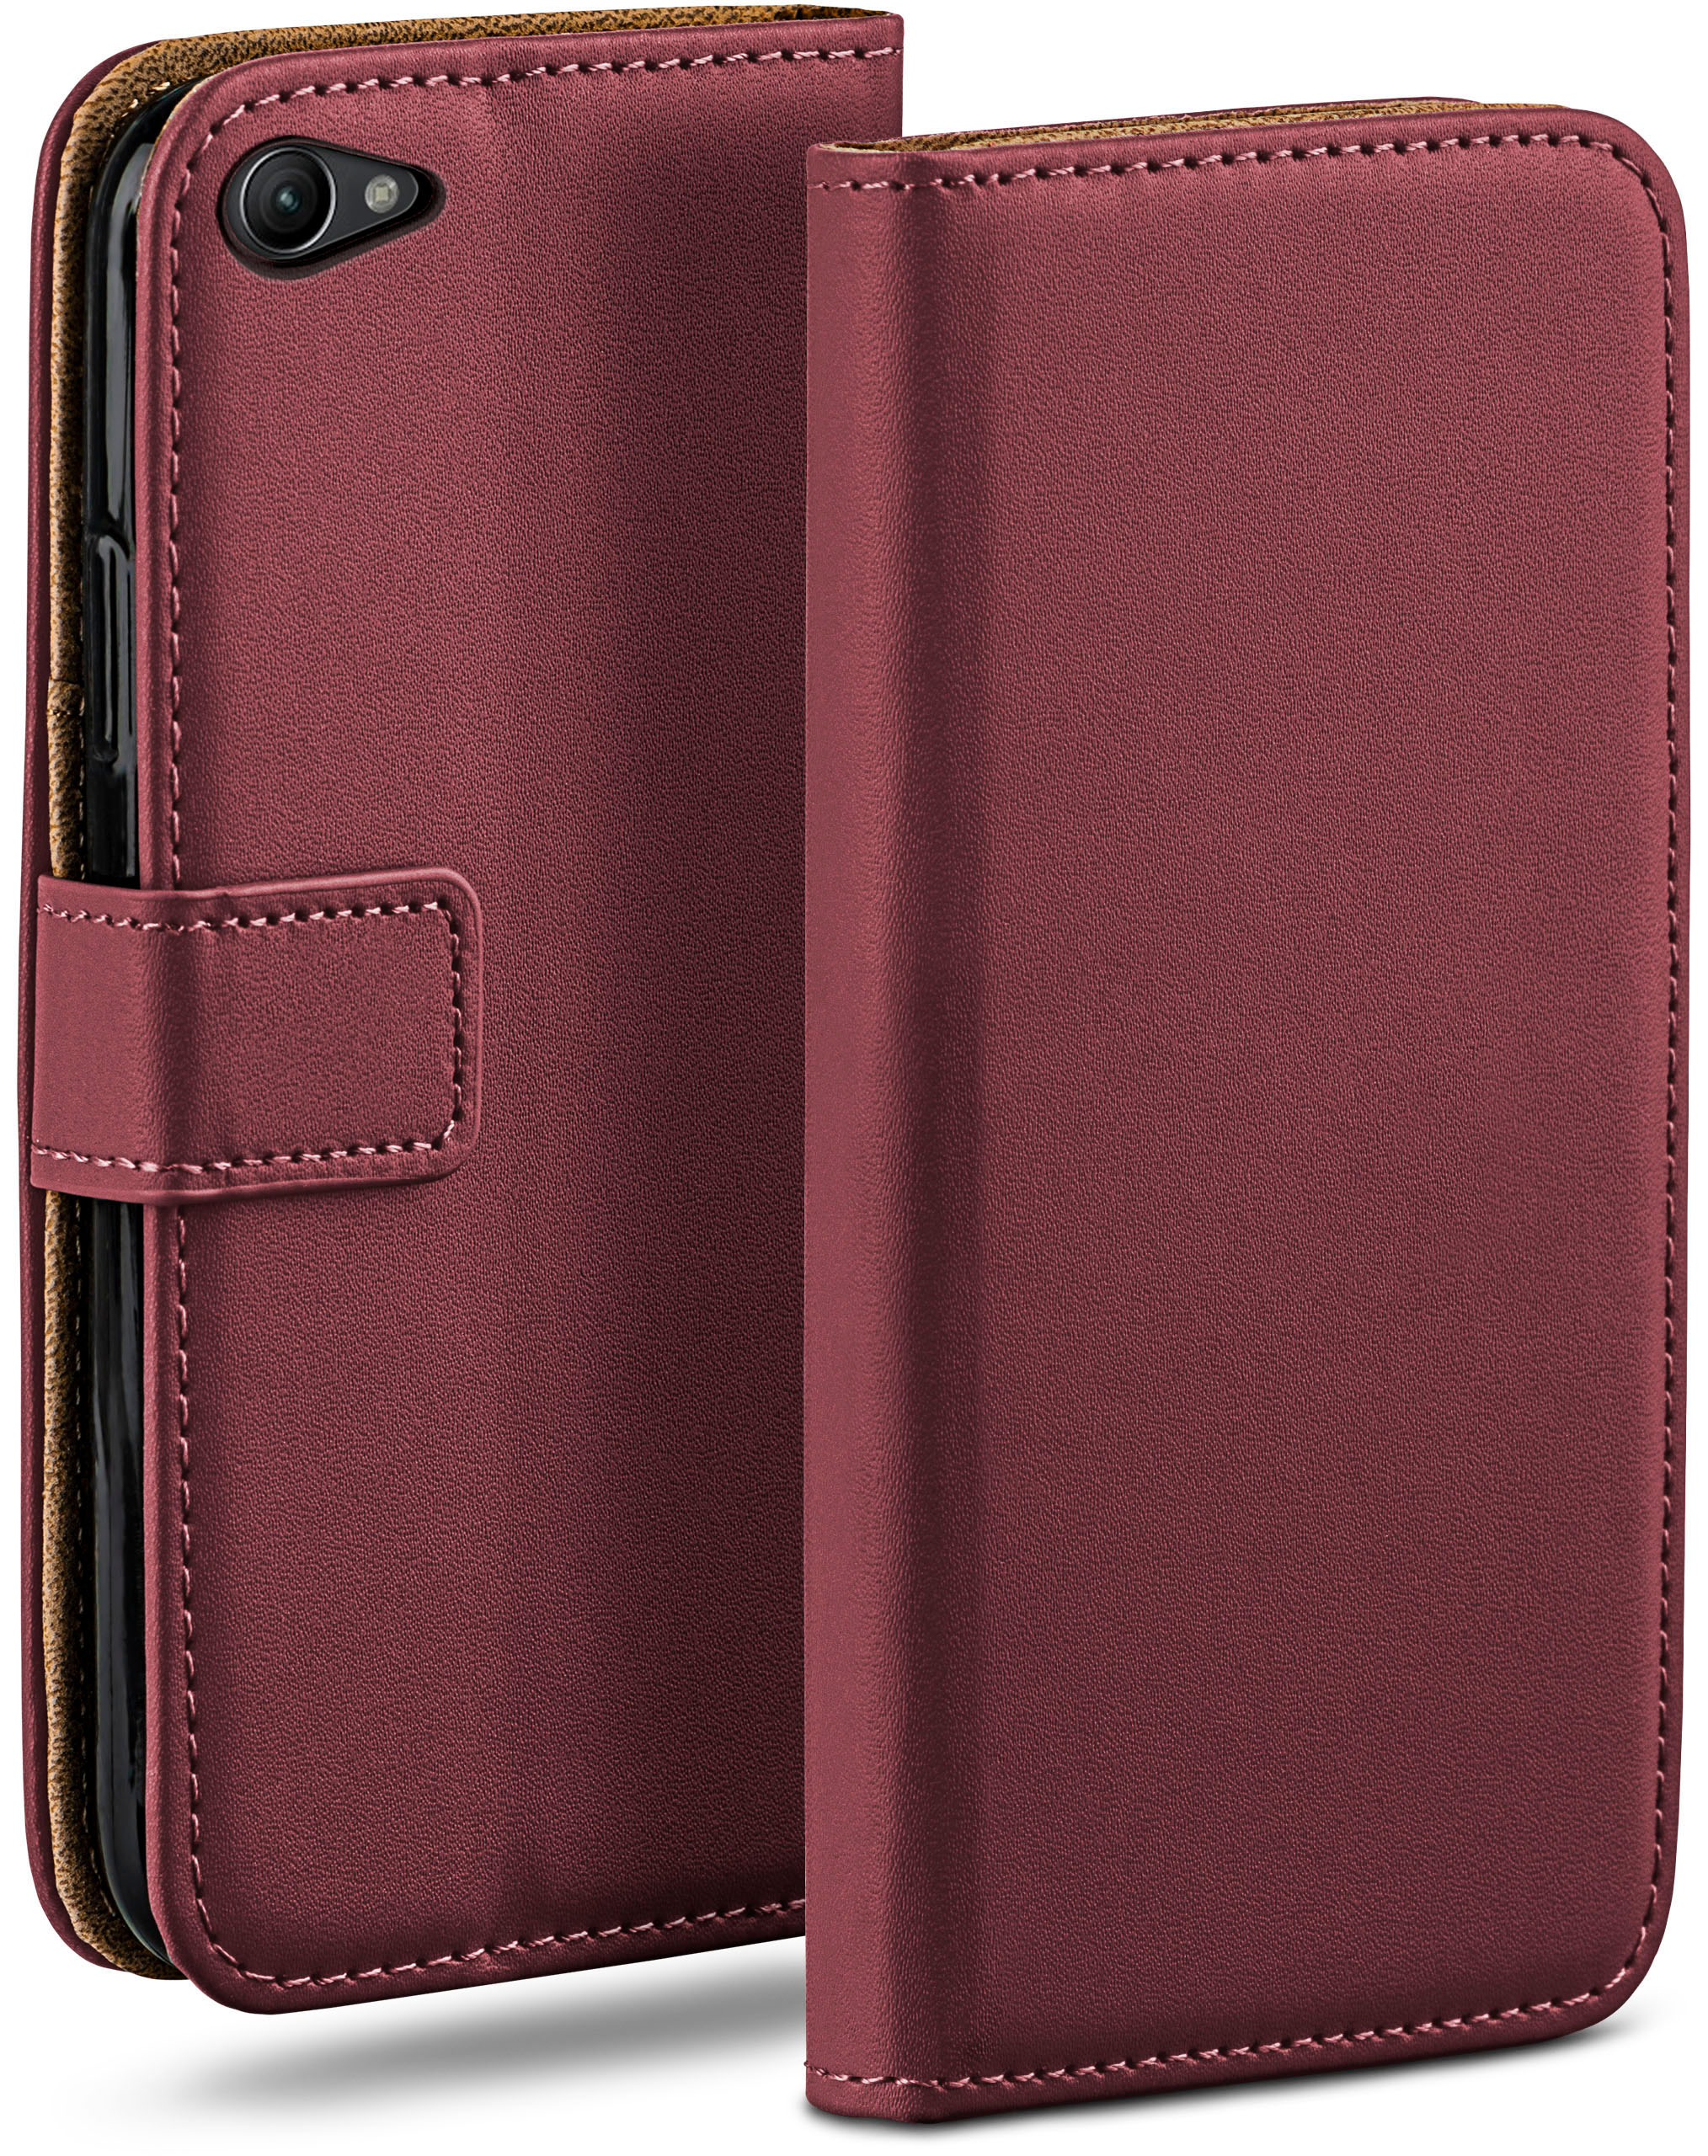 MOEX Book Case, Z1 Bookcover, Sony, Maroon-Red Xperia Compact